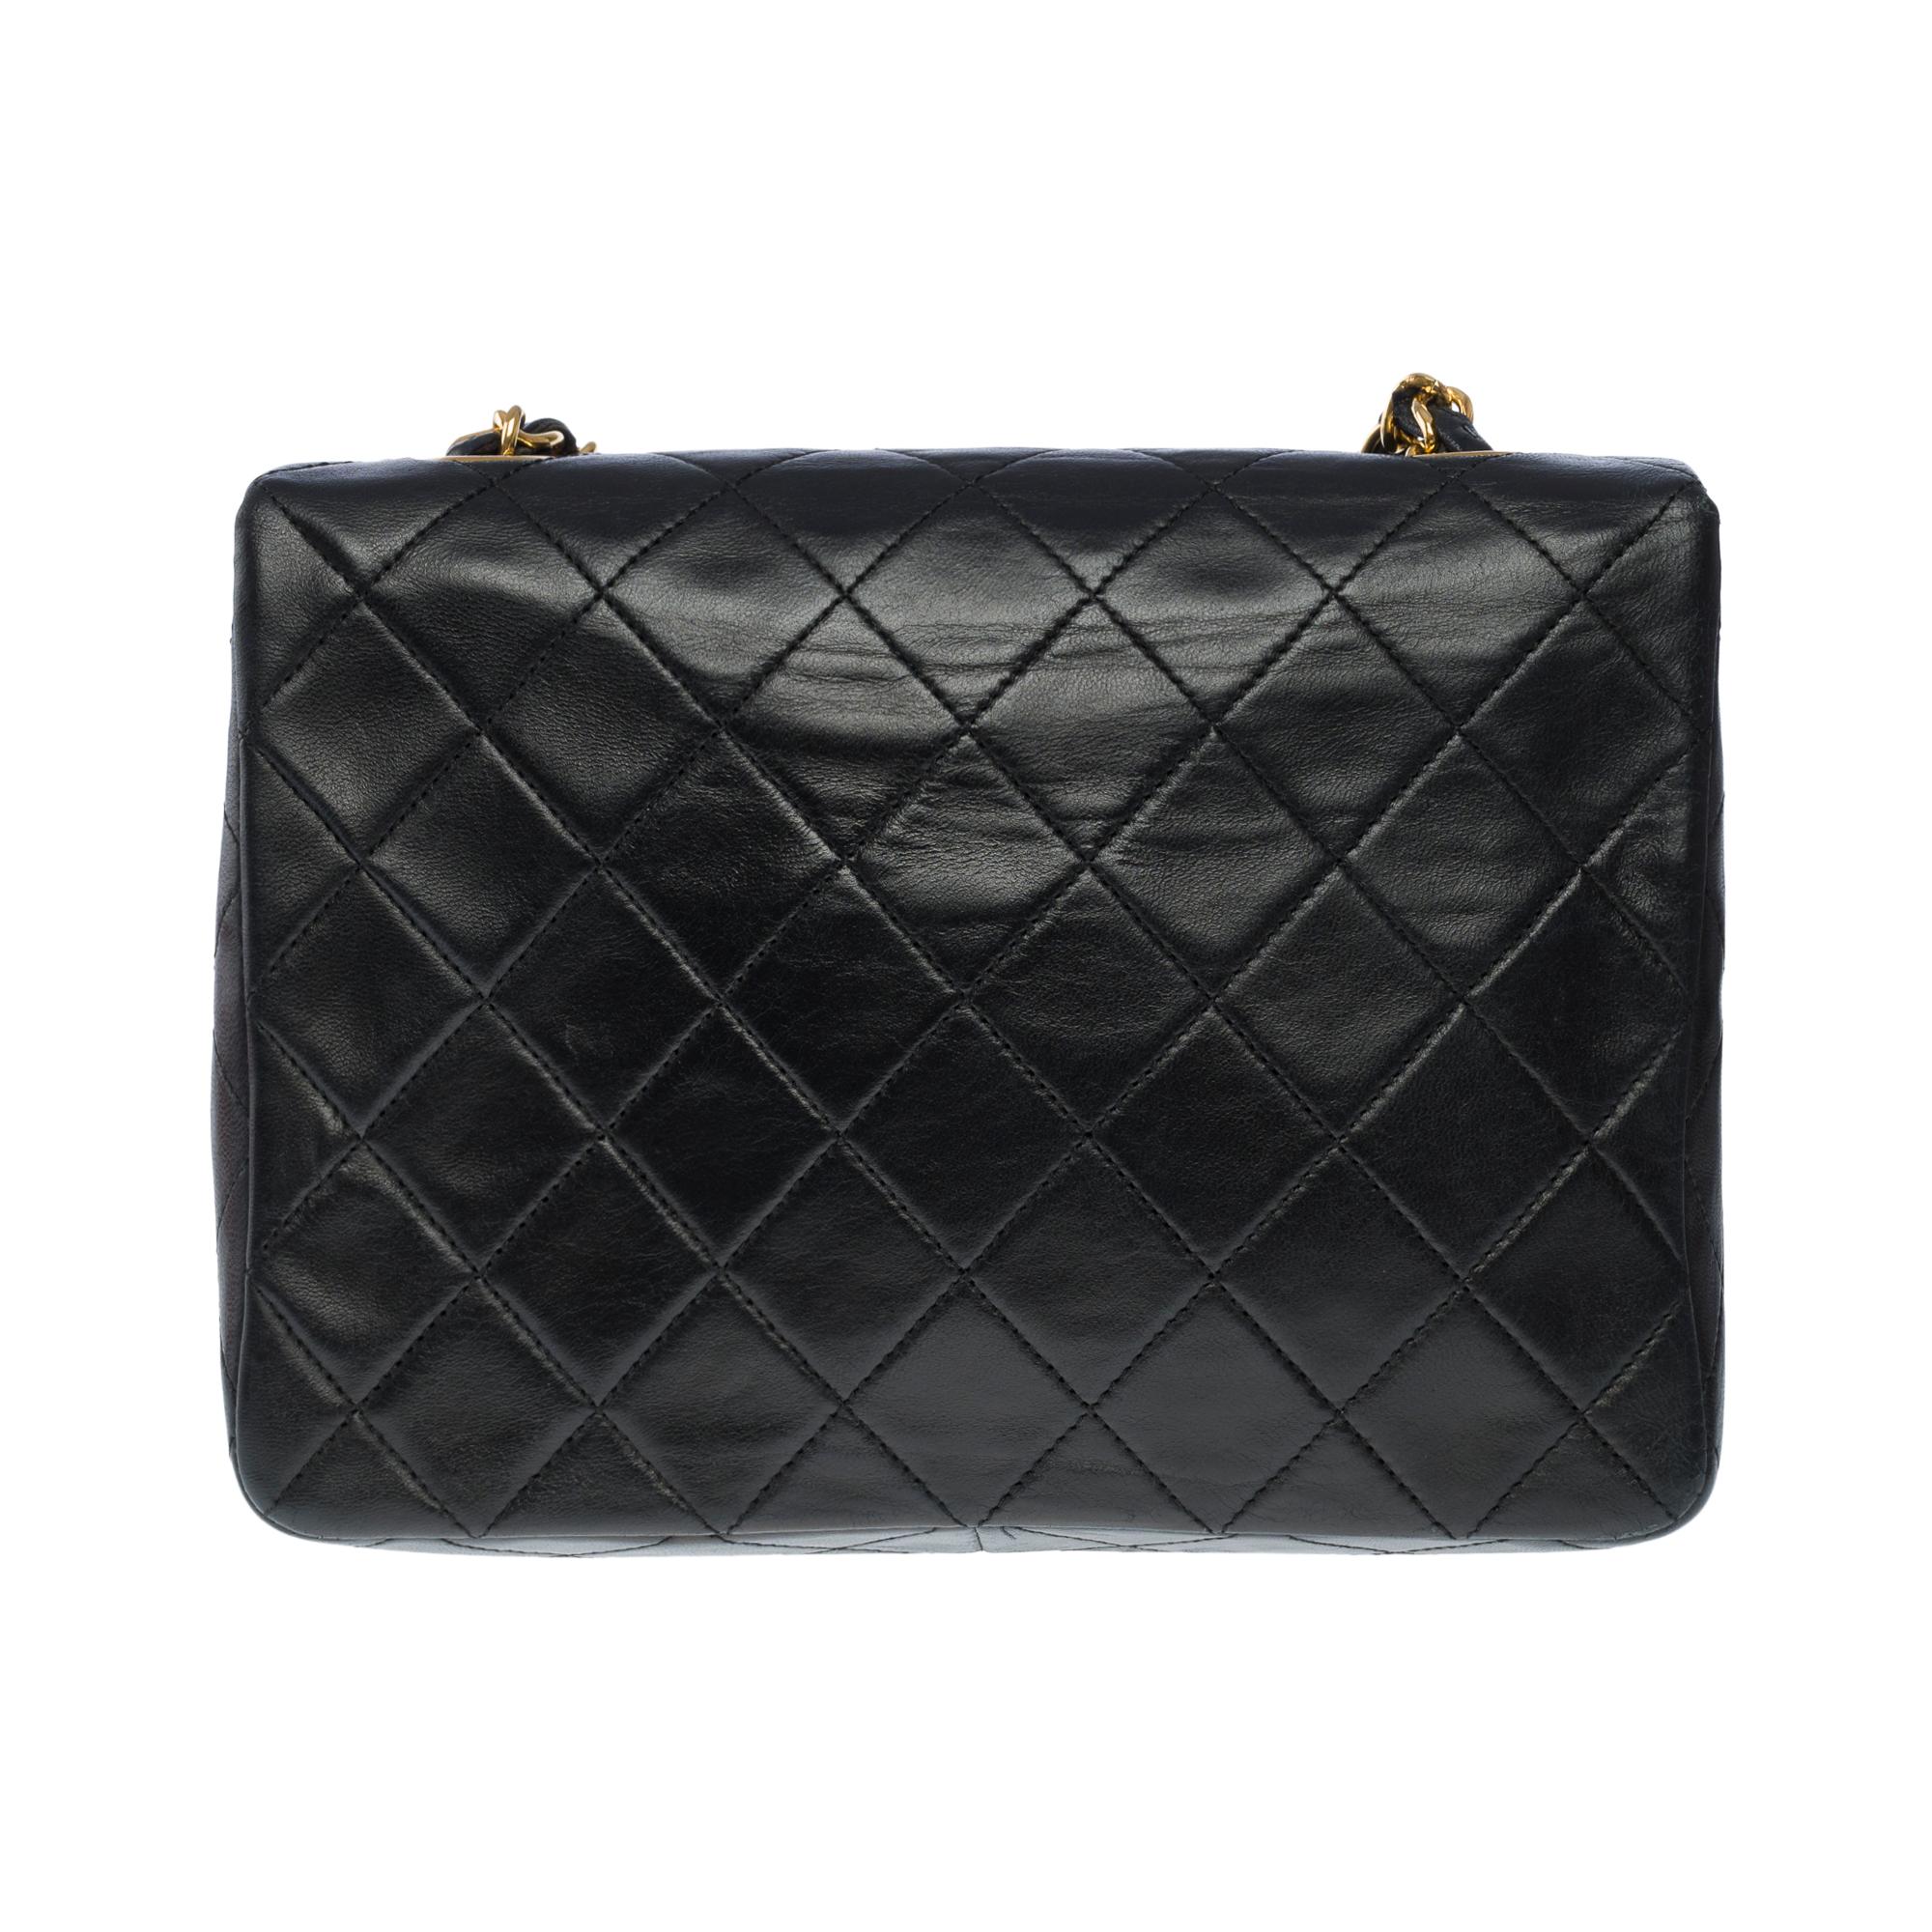 Women's Gorgeous Chanel Timeless Mini shoulder flap bag in black quilted lambskin, GHW